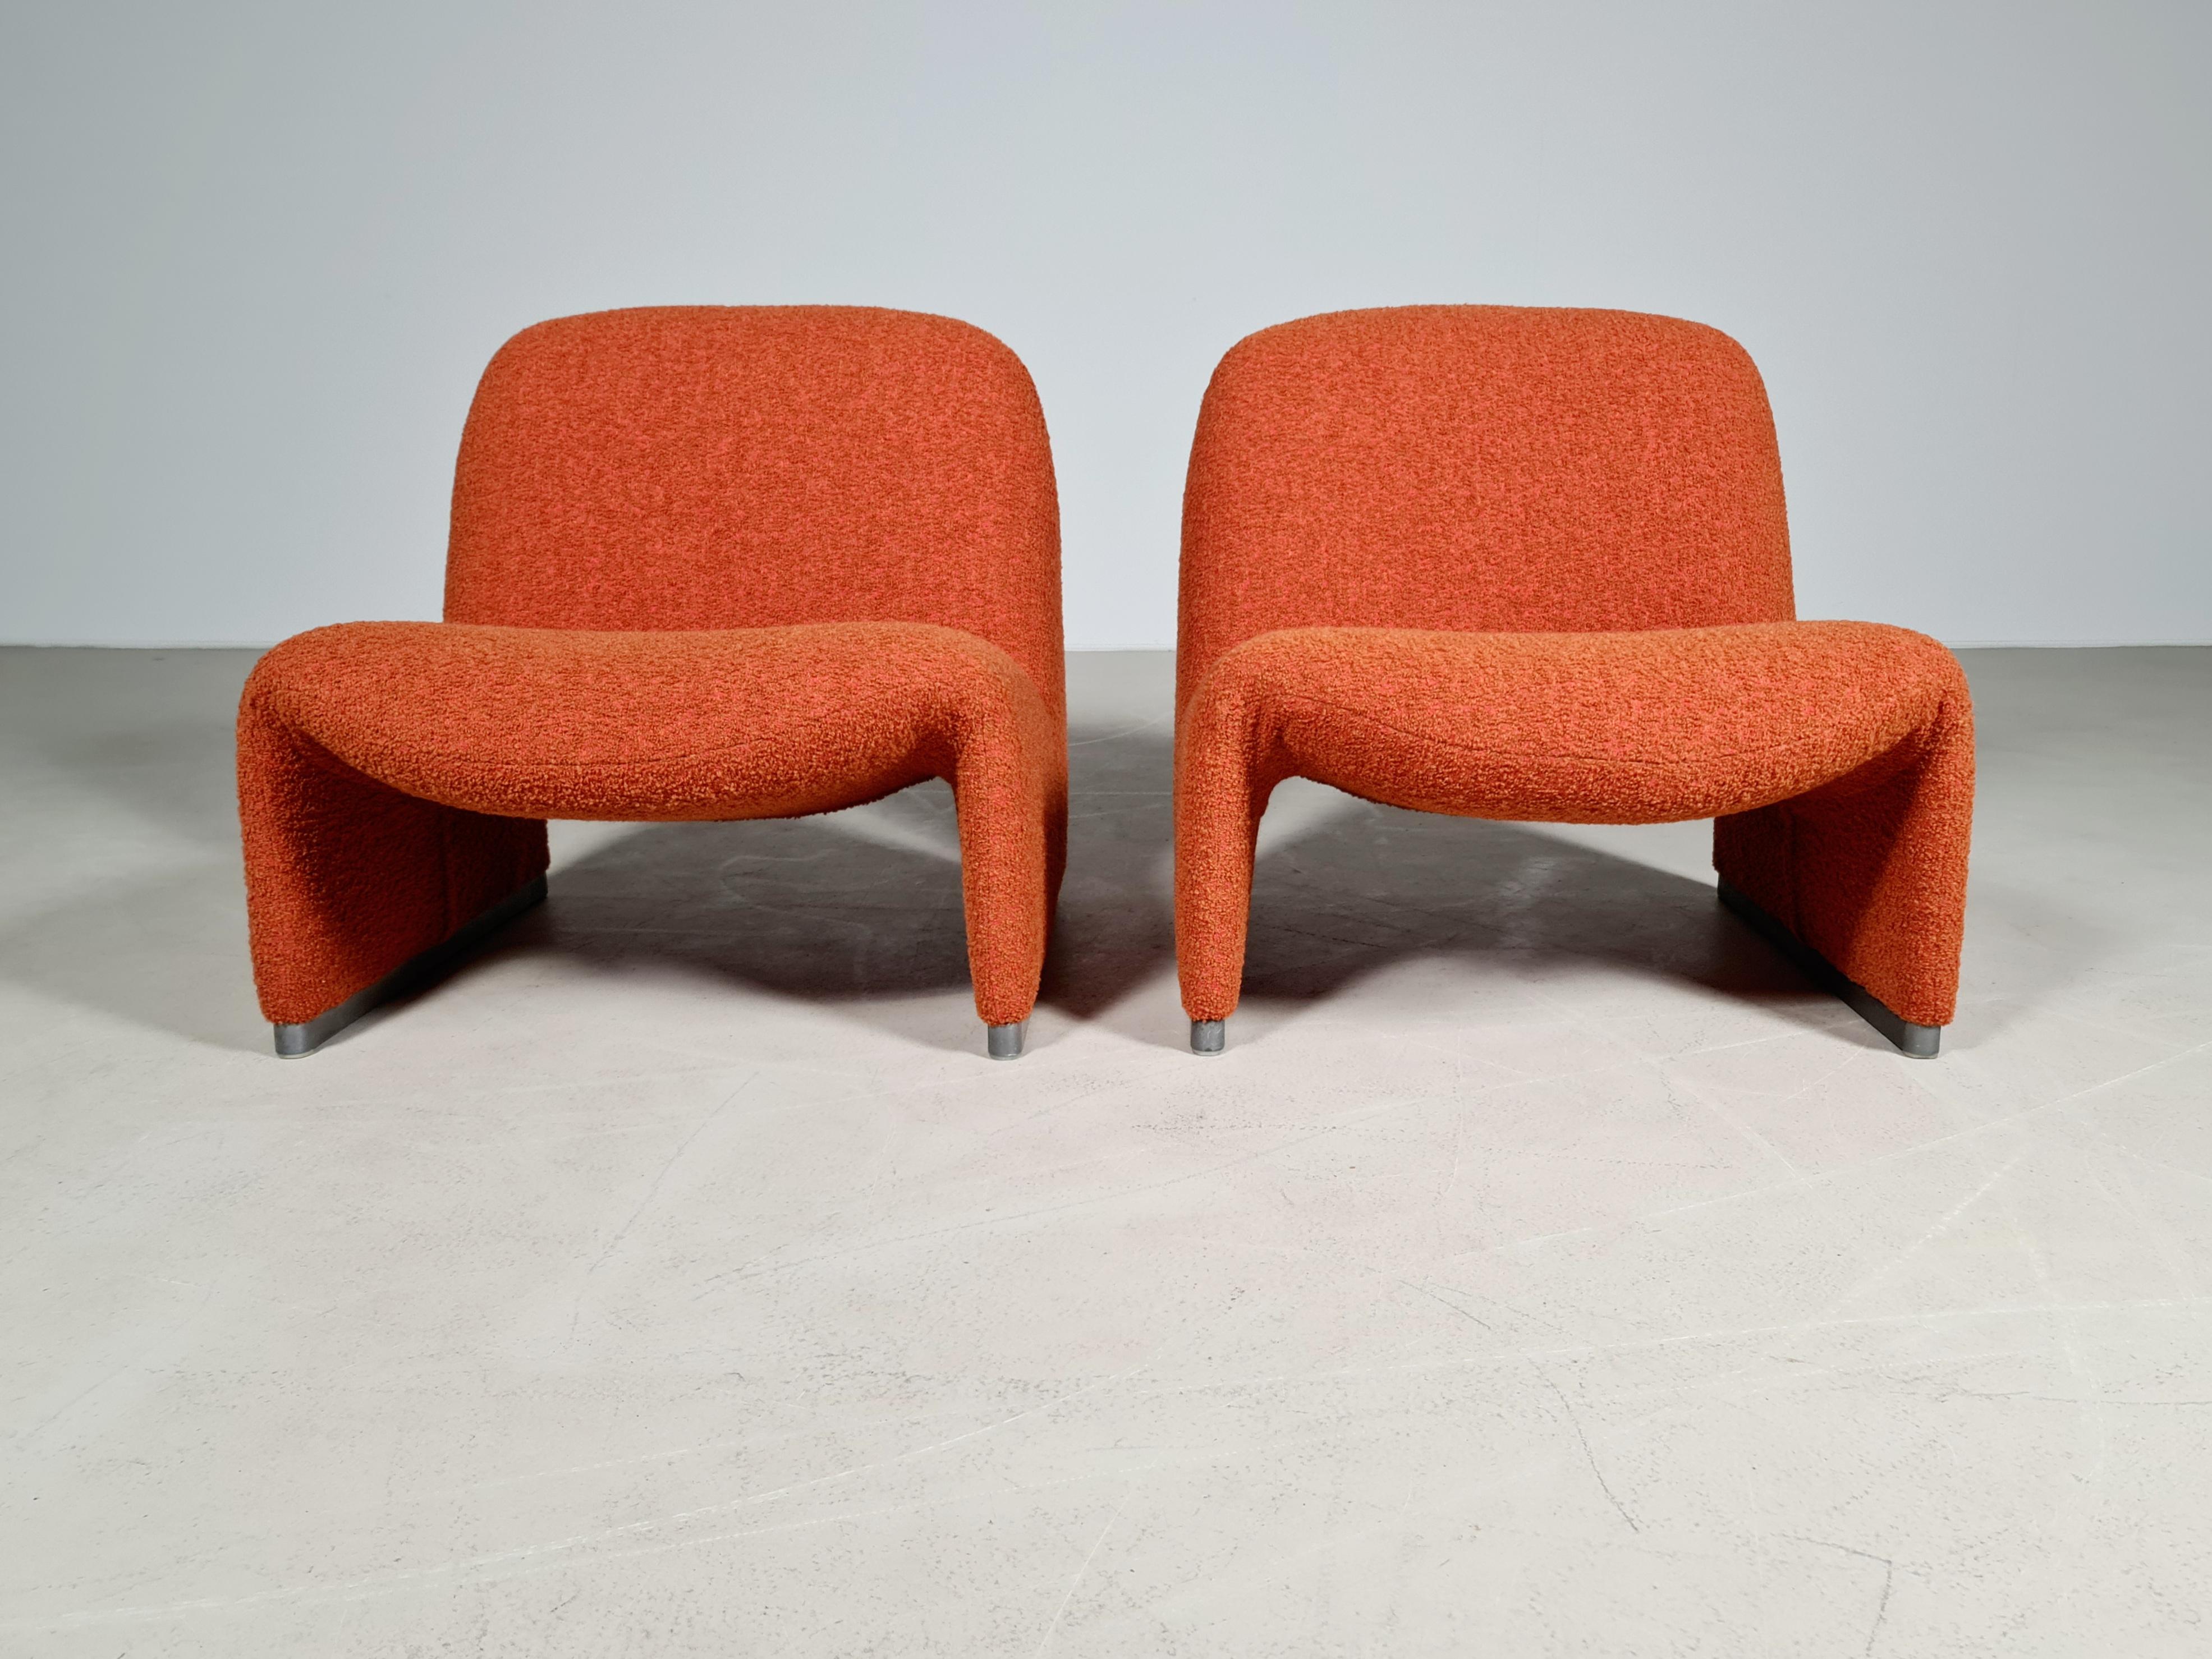 Giancarlo Piretti designed lounge “Alky” chairs newly upholstered in a high-end rusty red/orange cotton/wool Bouclé. Aluminum frame and polished chrome foot rests. Beautiful organic curves reminiscent of Pierre Paulin designs. Produced by Castelli 